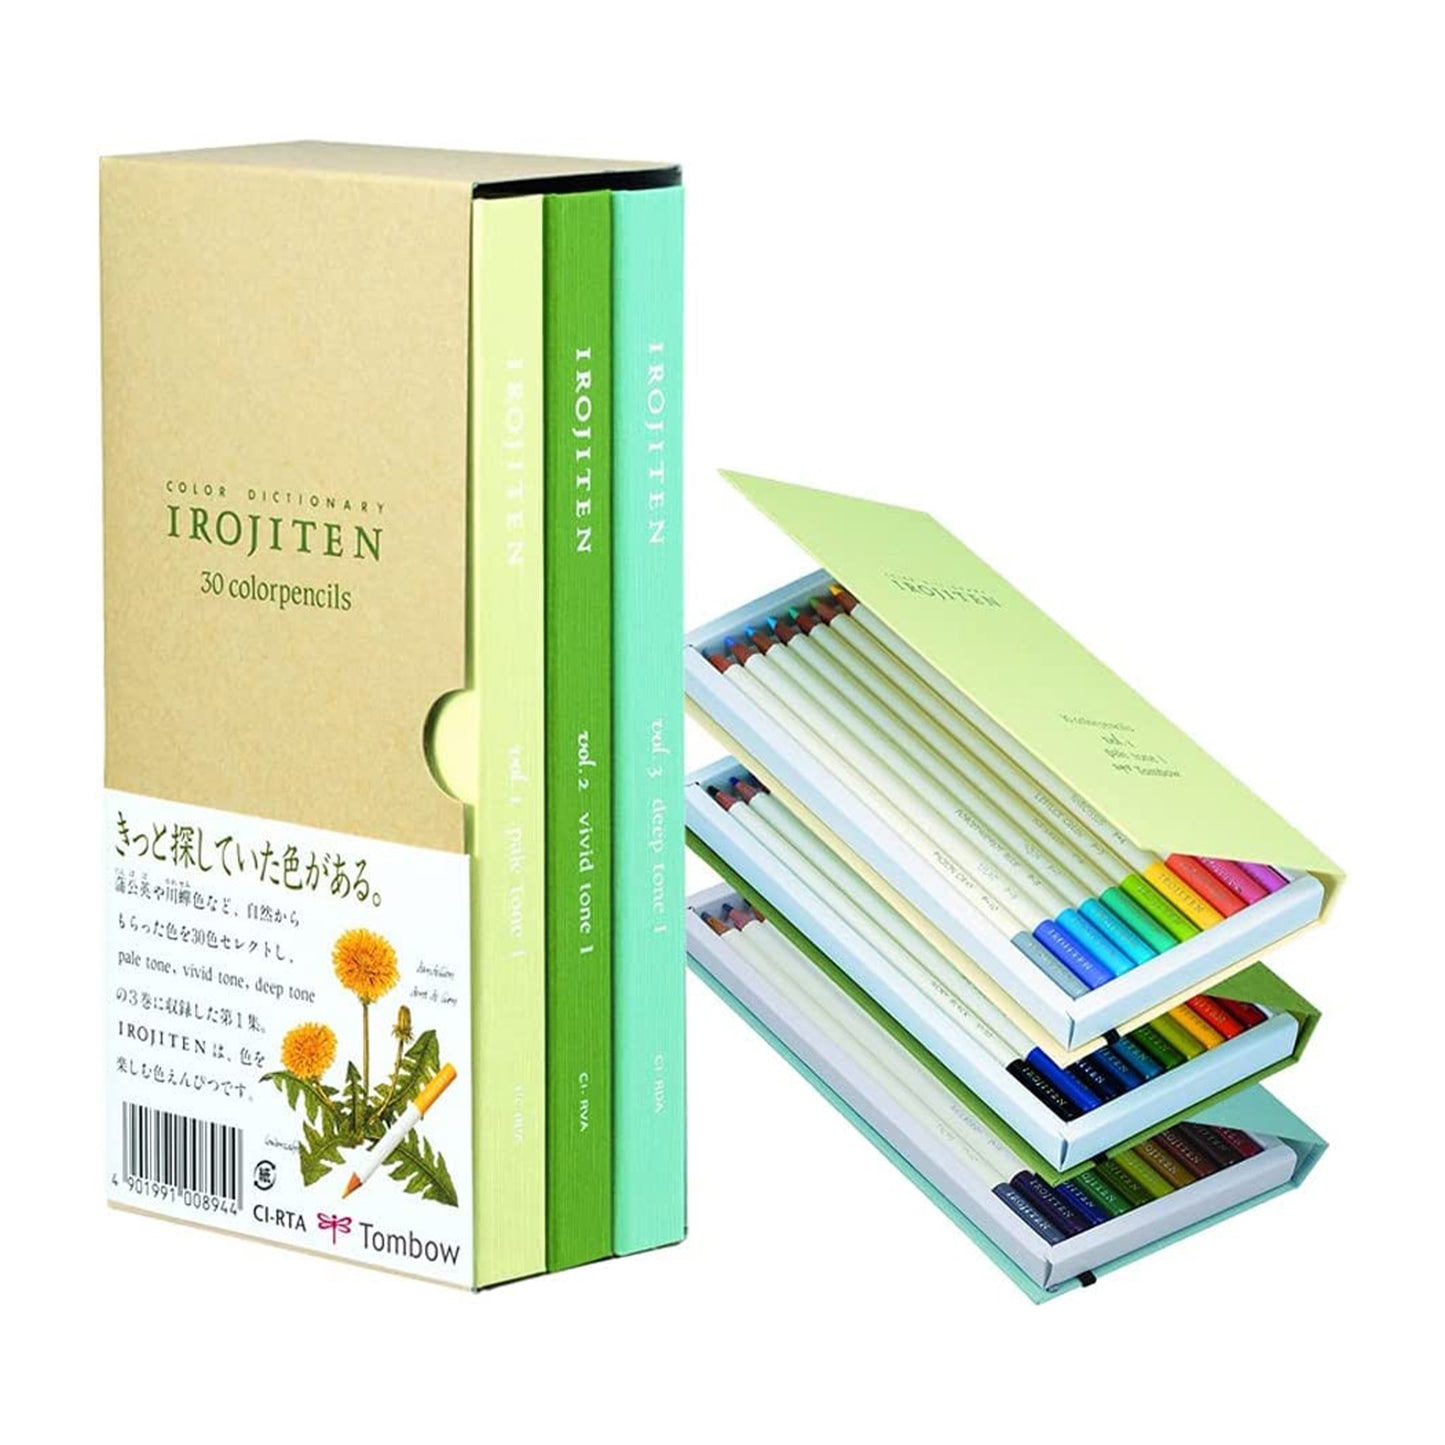 30 Irojiten Colored Pencil Collection Vol. 1, 2, 3 / Tombow